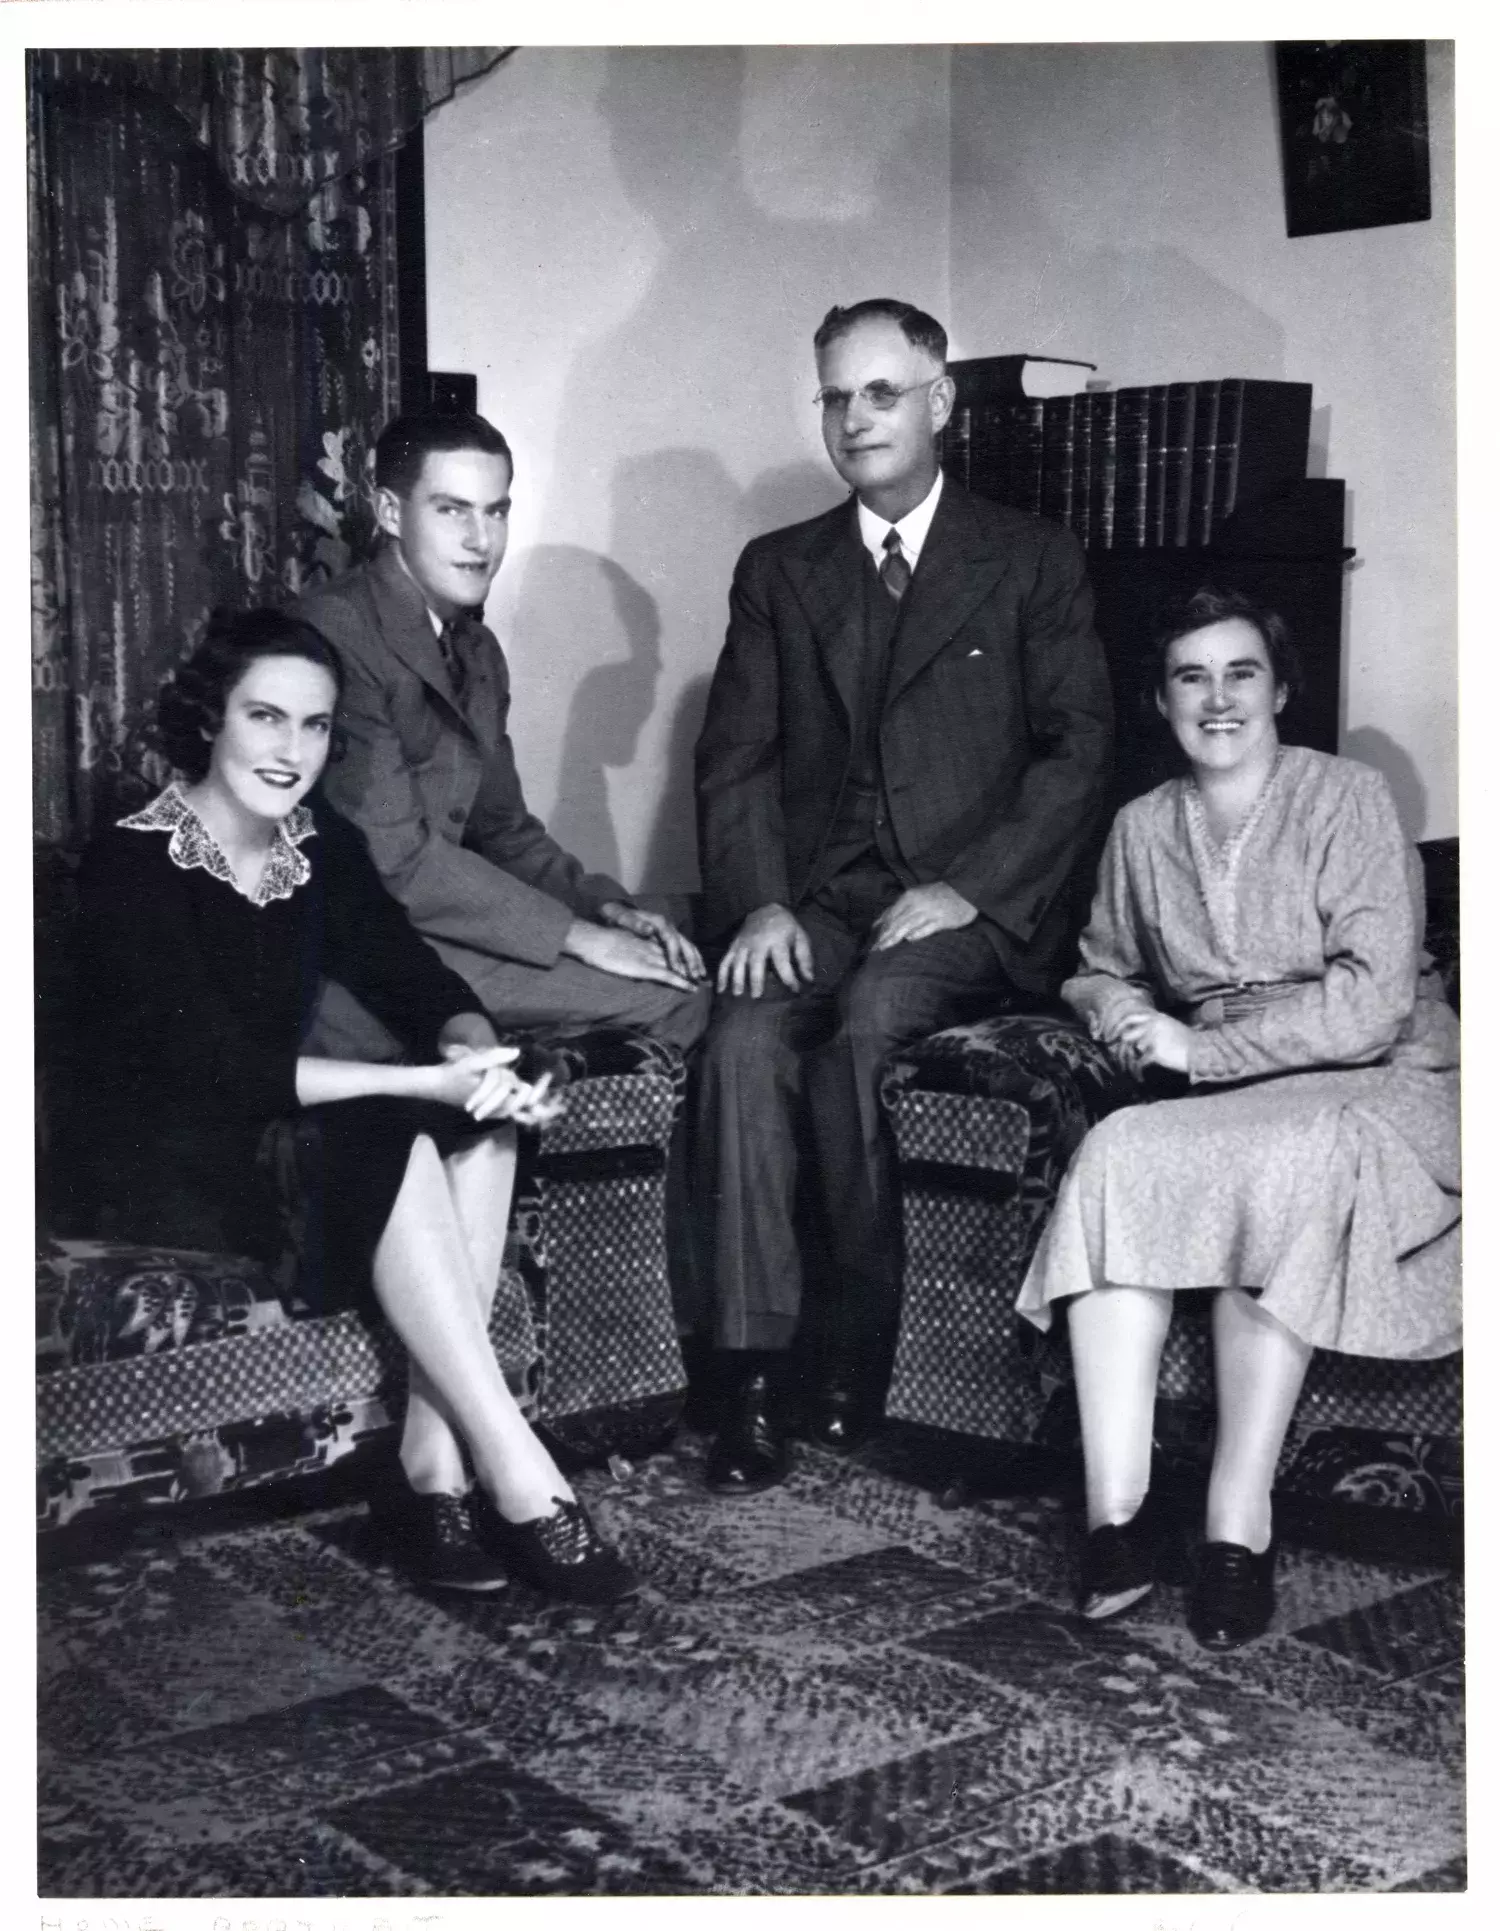 John Curtin and his wife and two children pose for a photo in a living room.  